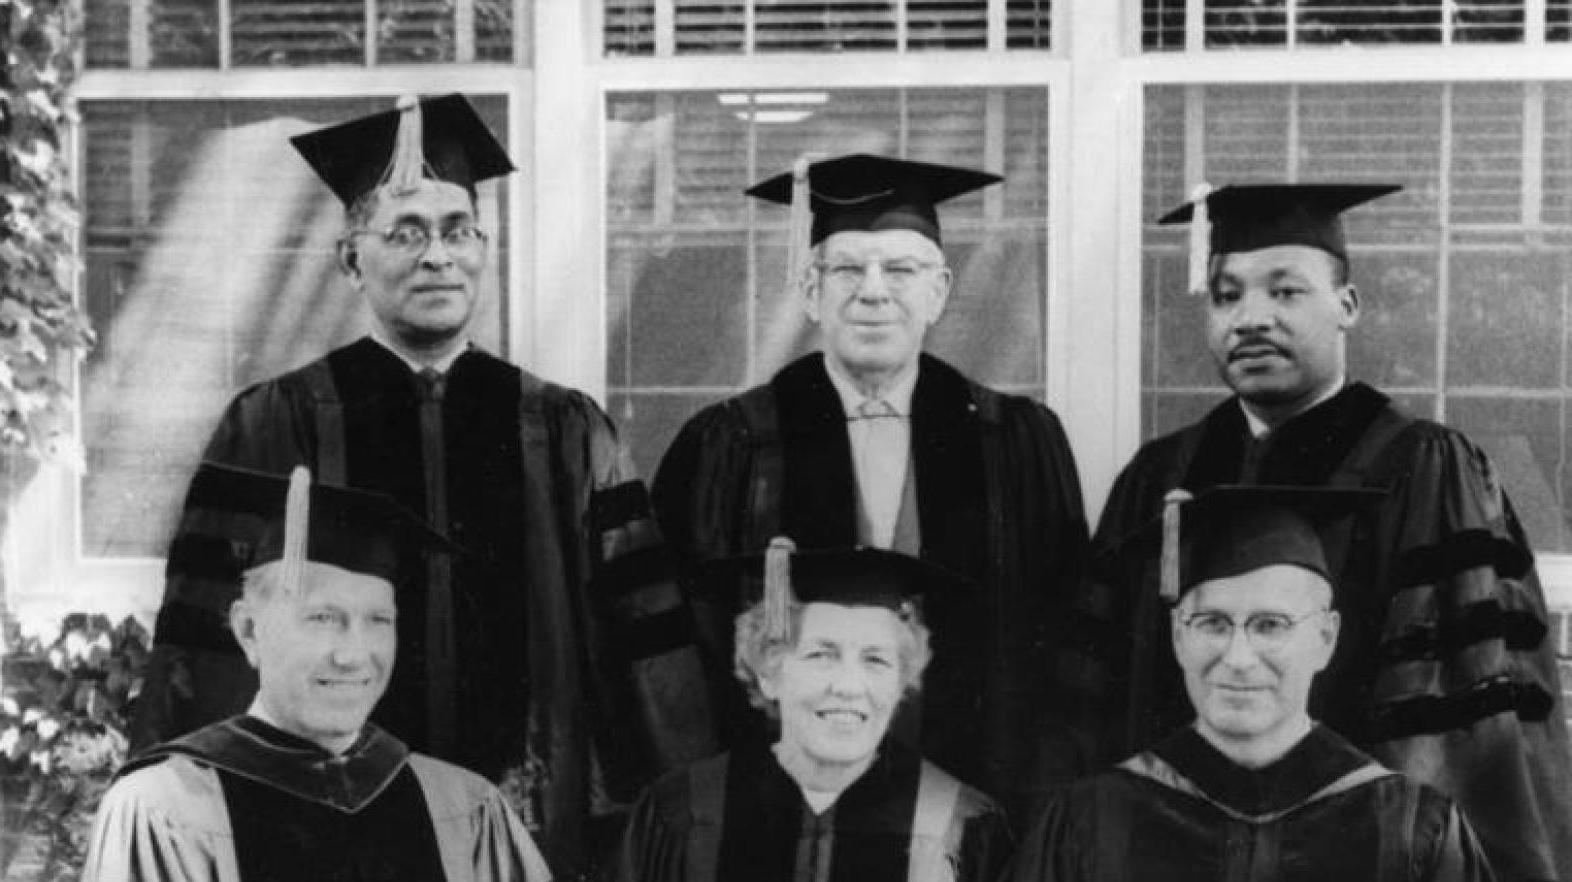 Rev. Martin Luther King Jr. gives the commencement address and receives an honorary Doctor of Humanics on June 14, despite outside attempts to persuade the College to rescind its invitation to King.